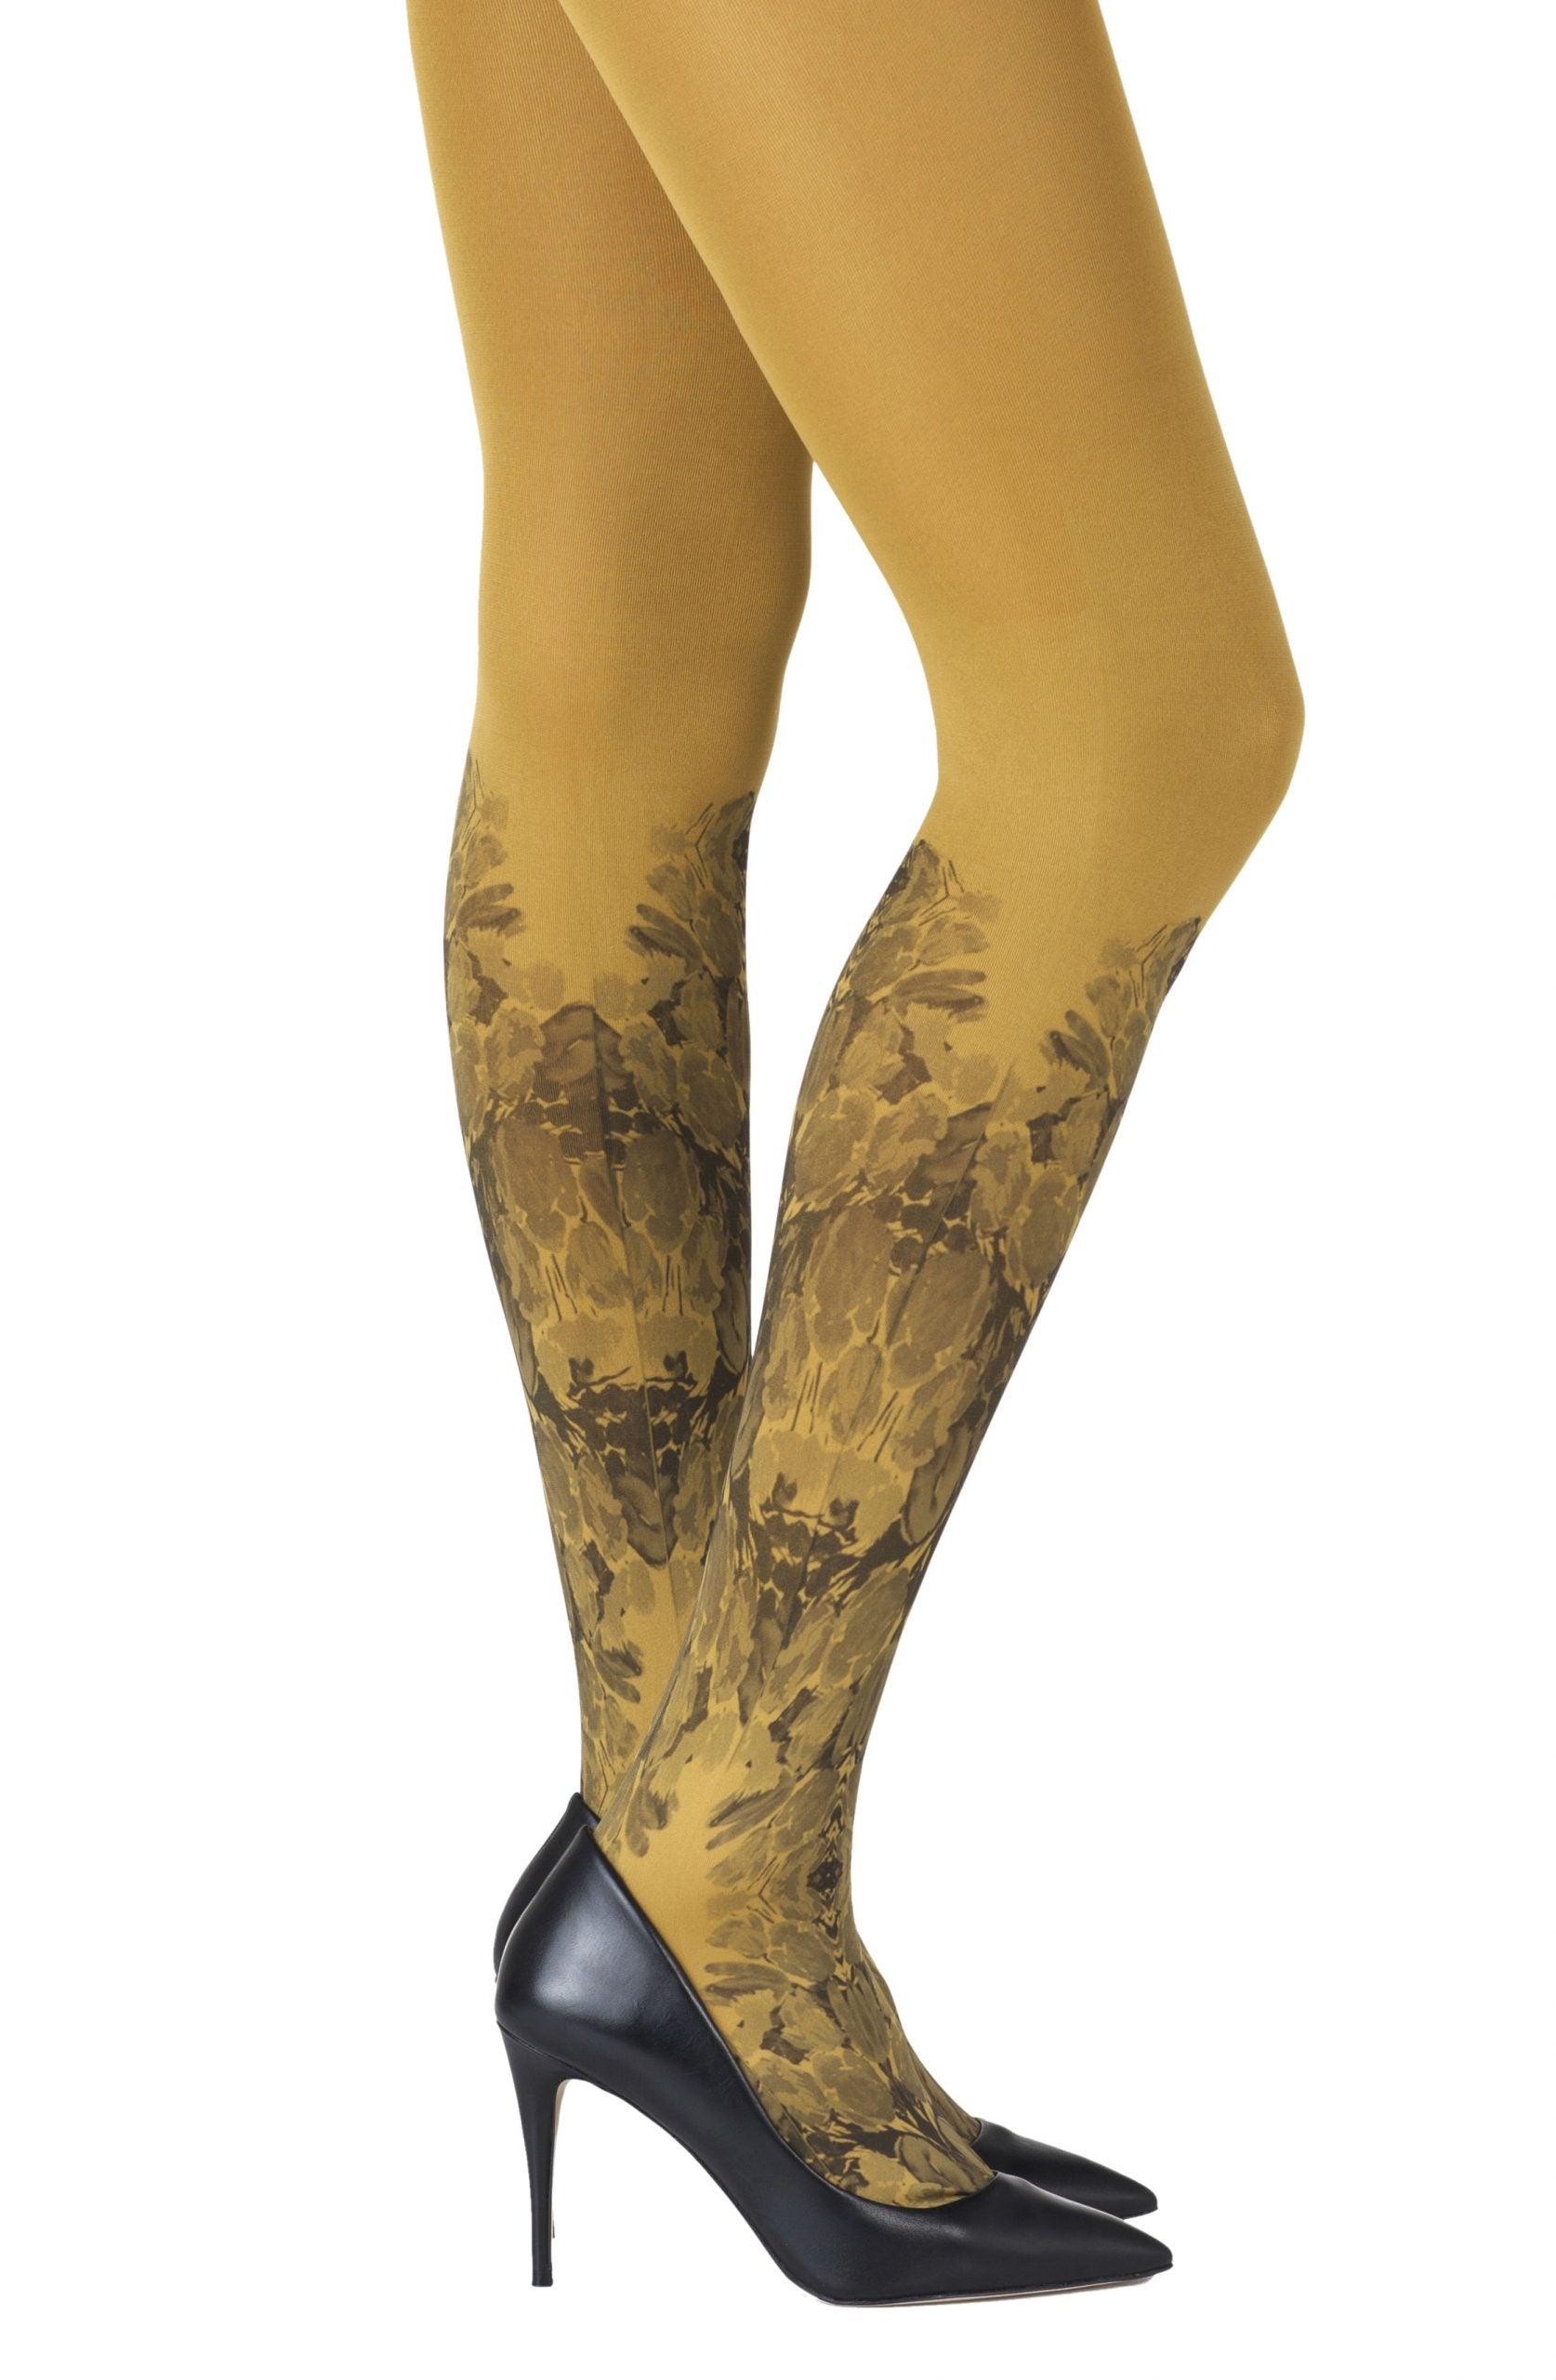 Zohara &quot;Totally Tulip&quot; Mustard Tights - Sydney Rose Lingerie 